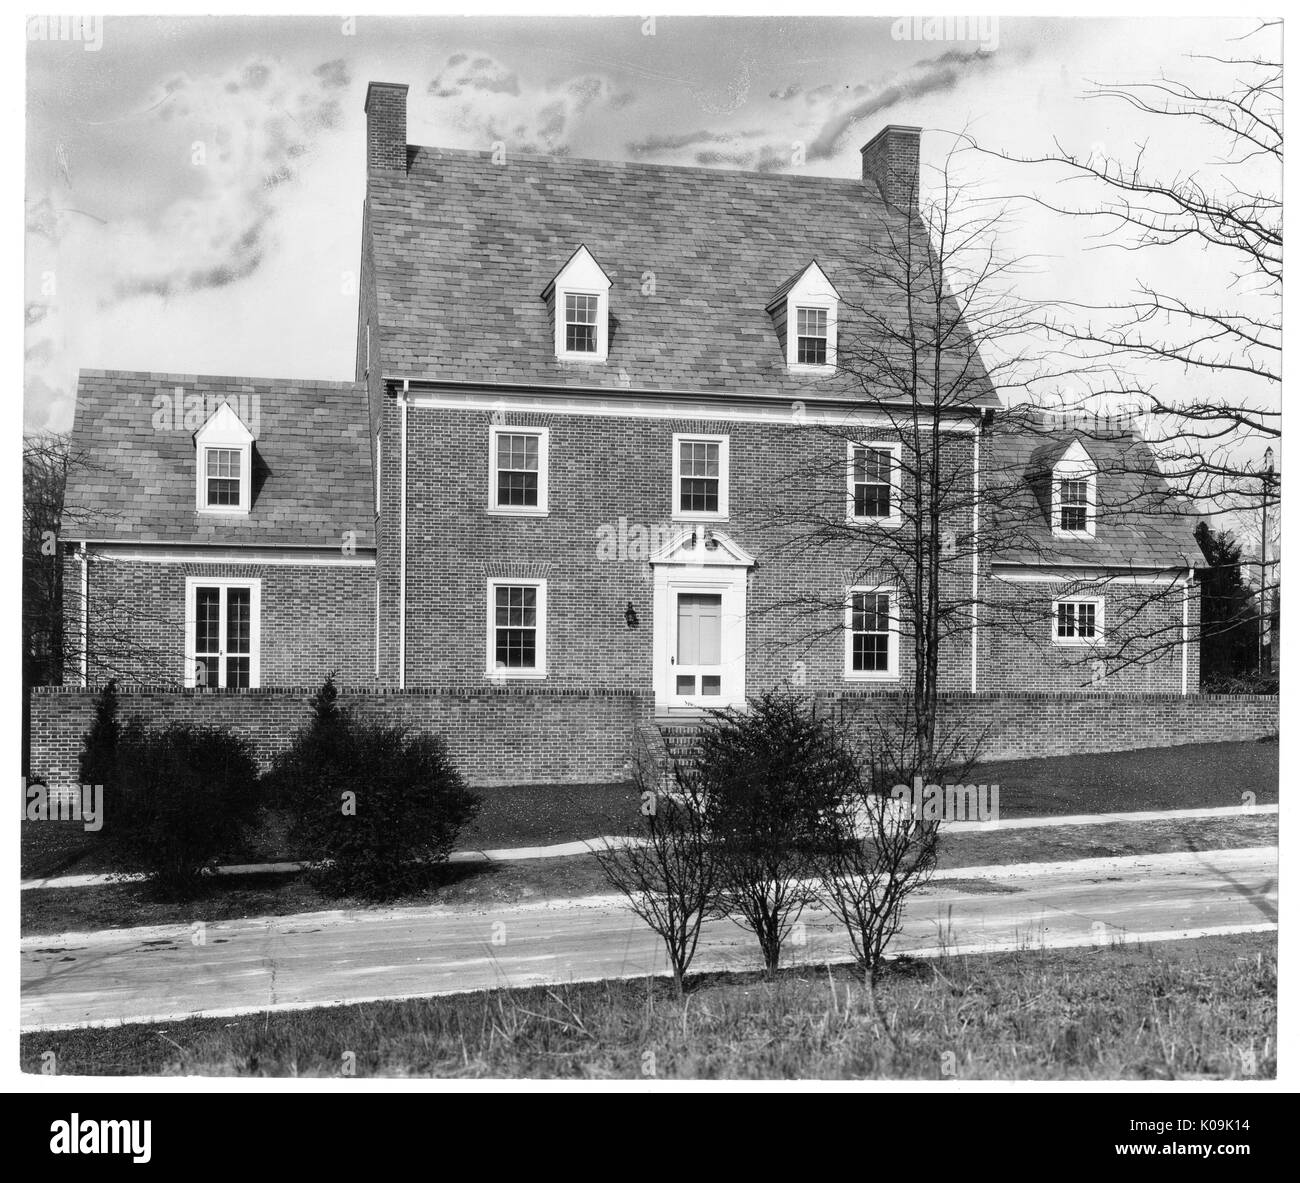 Front angle view of a single family brick house near Guilford, the house has attached rooms on both sides and a fence made of brick that lines the perimeter of the front of the house, Baltimore, Maryland, 1910. This image is from a series documenting the construction and sale of homes in the Roland Park/Guilford neighborhood of Baltimore, a streetcar suburb and one of the first planned communities in the United States. The neighborhood was segregated, and is considered an early example of the enforcement of racial segregation through the use of restricted covenants. Stock Photo